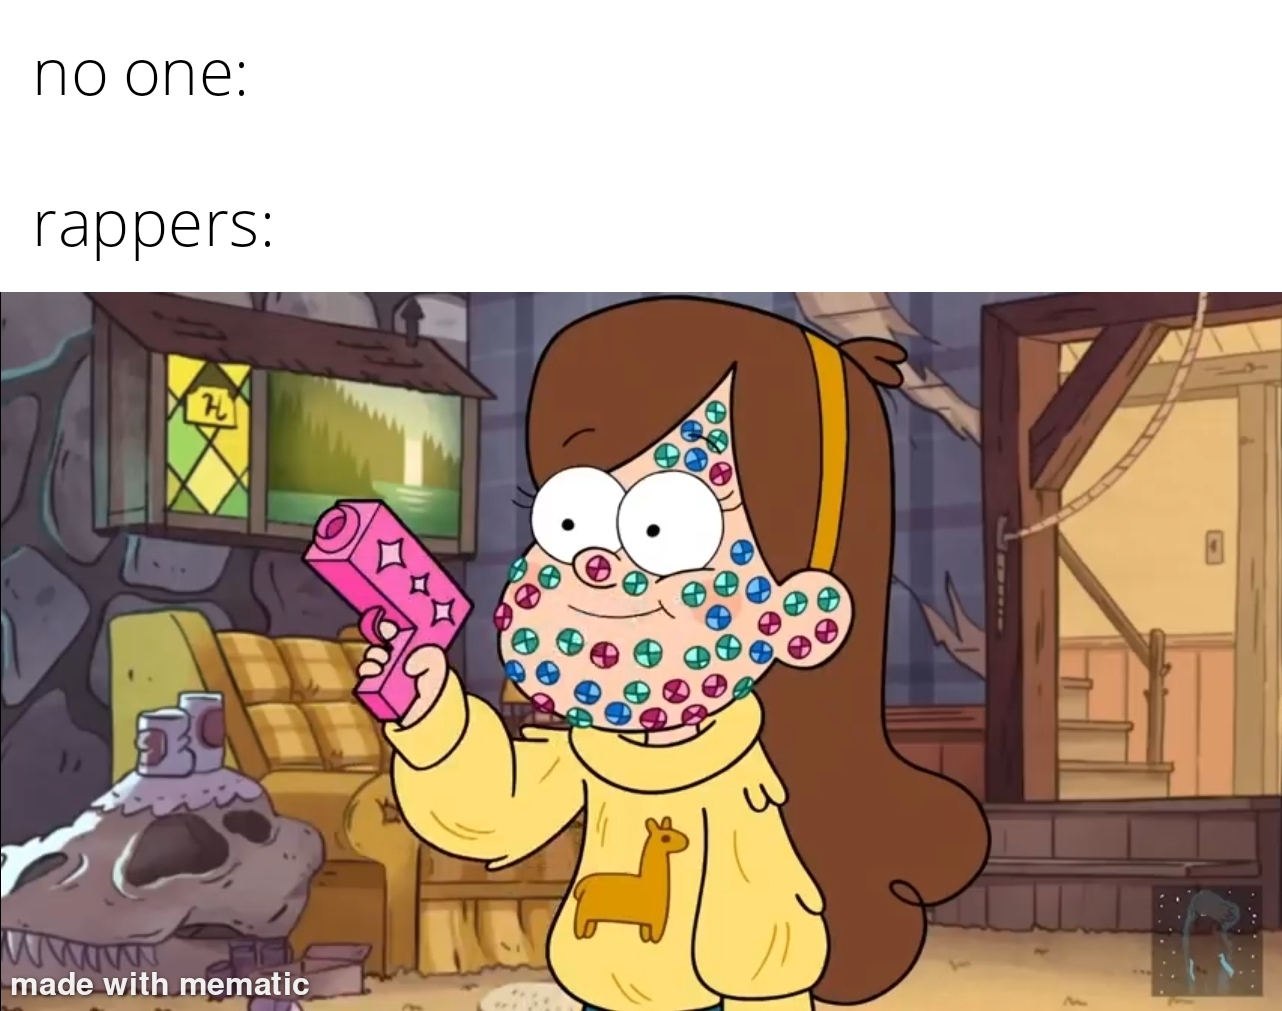 funny memes - dank memes - mabel gravity falls - no one rappers 7 Ww Ww made with mematic